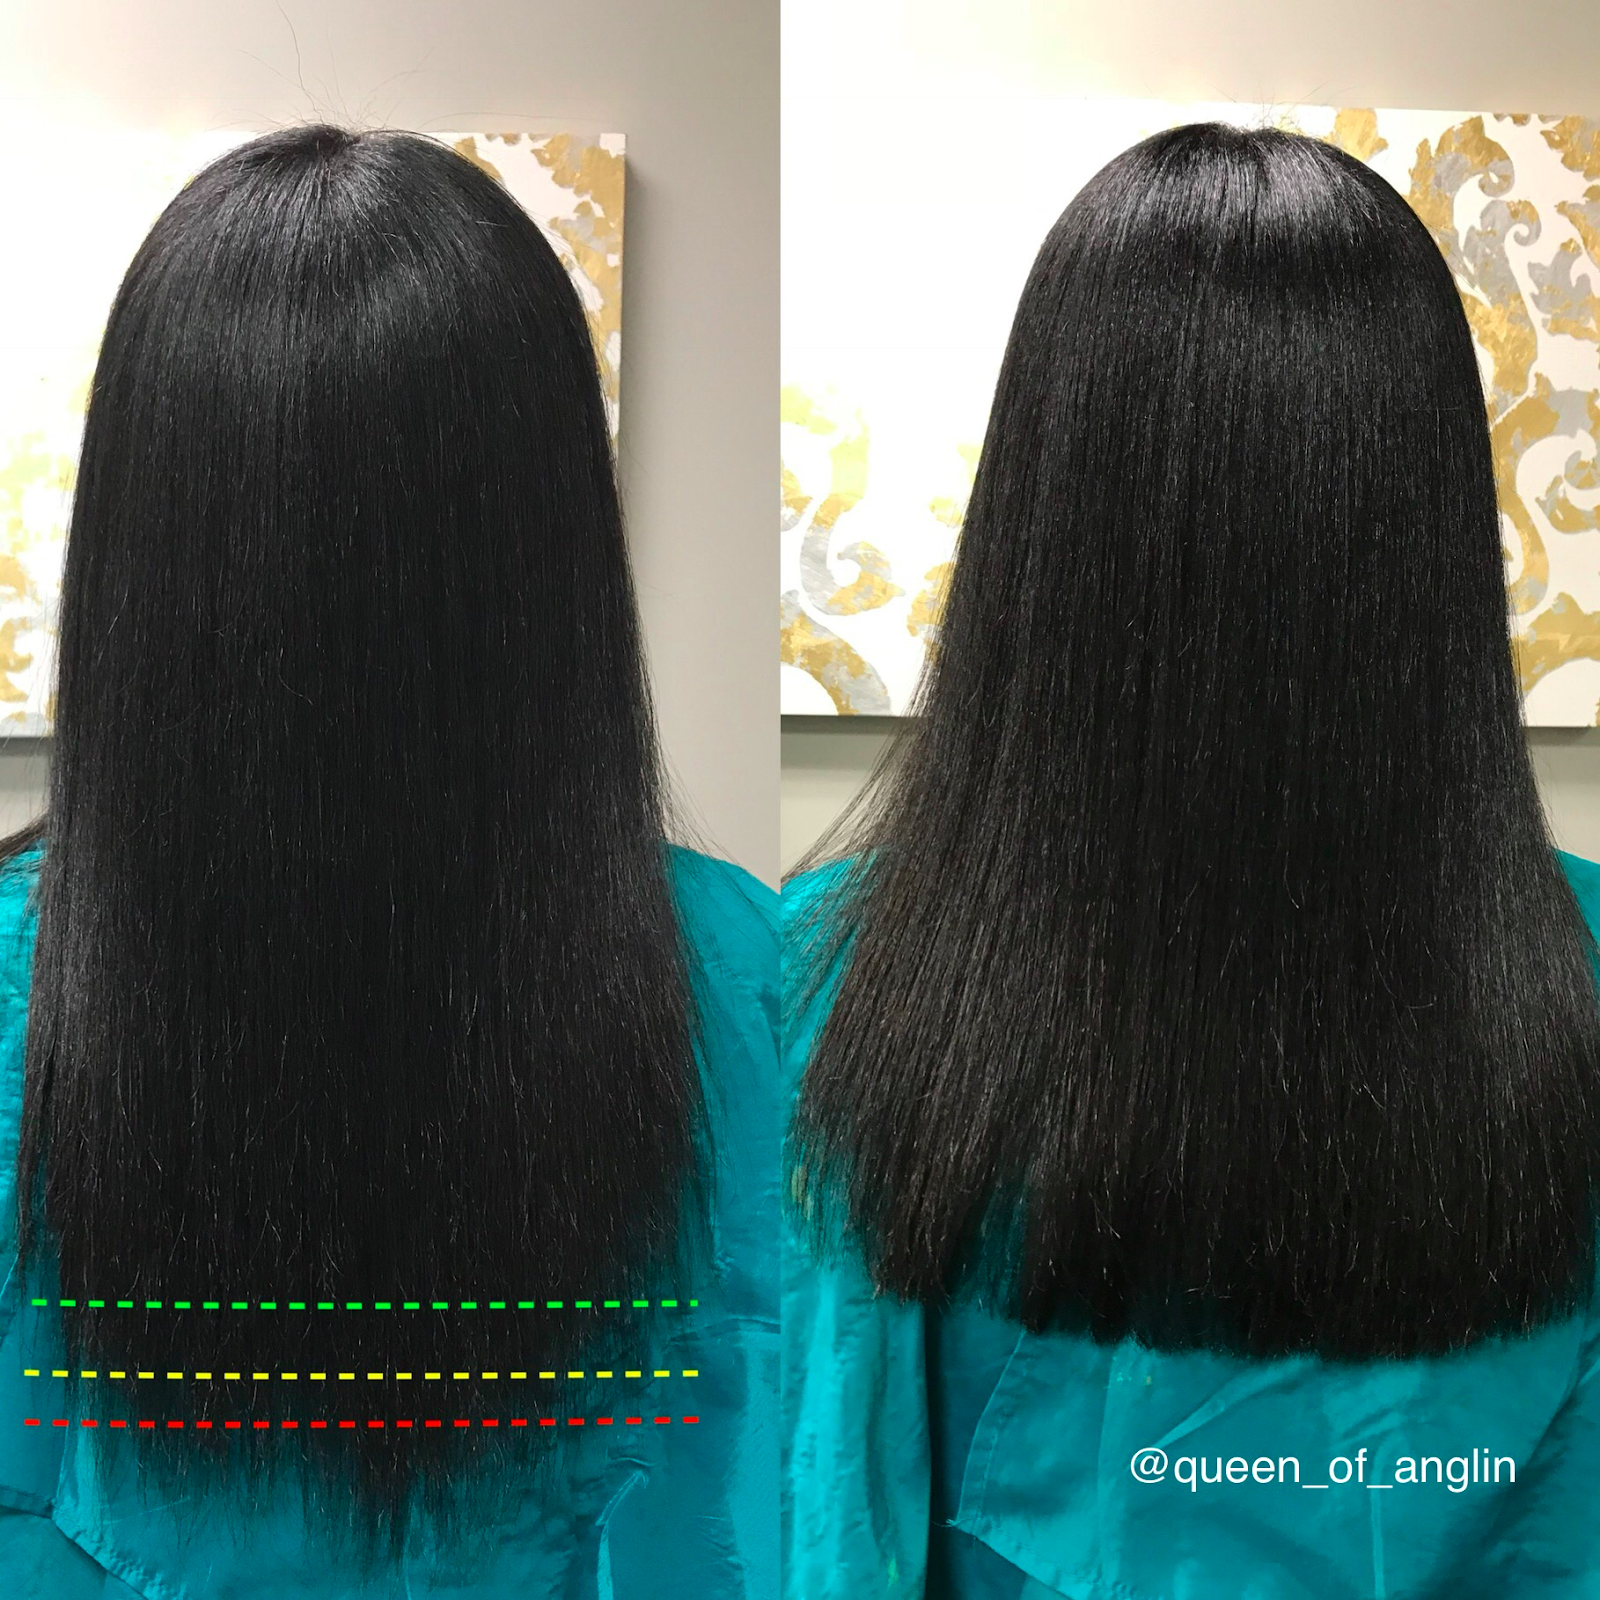 Are You Keeping Your “Denial Length”? Here's Why You Should Trim Your Hair  - xoNecole: Women's Interest, Love, Wellness, Beauty